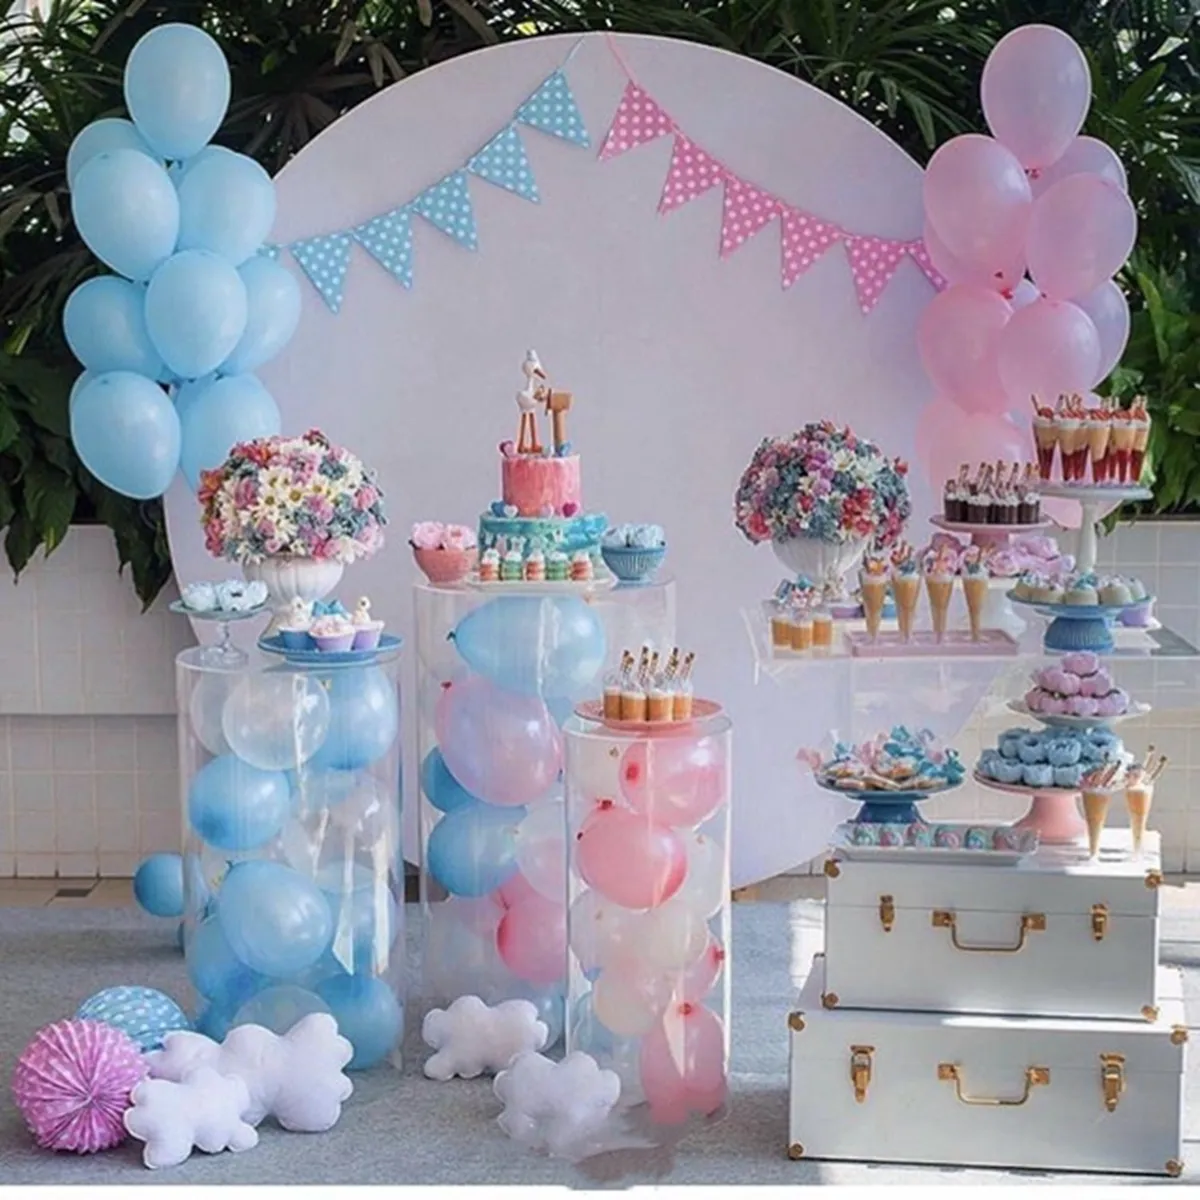 decoration Round Cylinder Acrylic Plinths Cake Table Pedestal Stand Pillar Balloons Rack For Baby Shower Birthday Party DIY Wedding imake0031